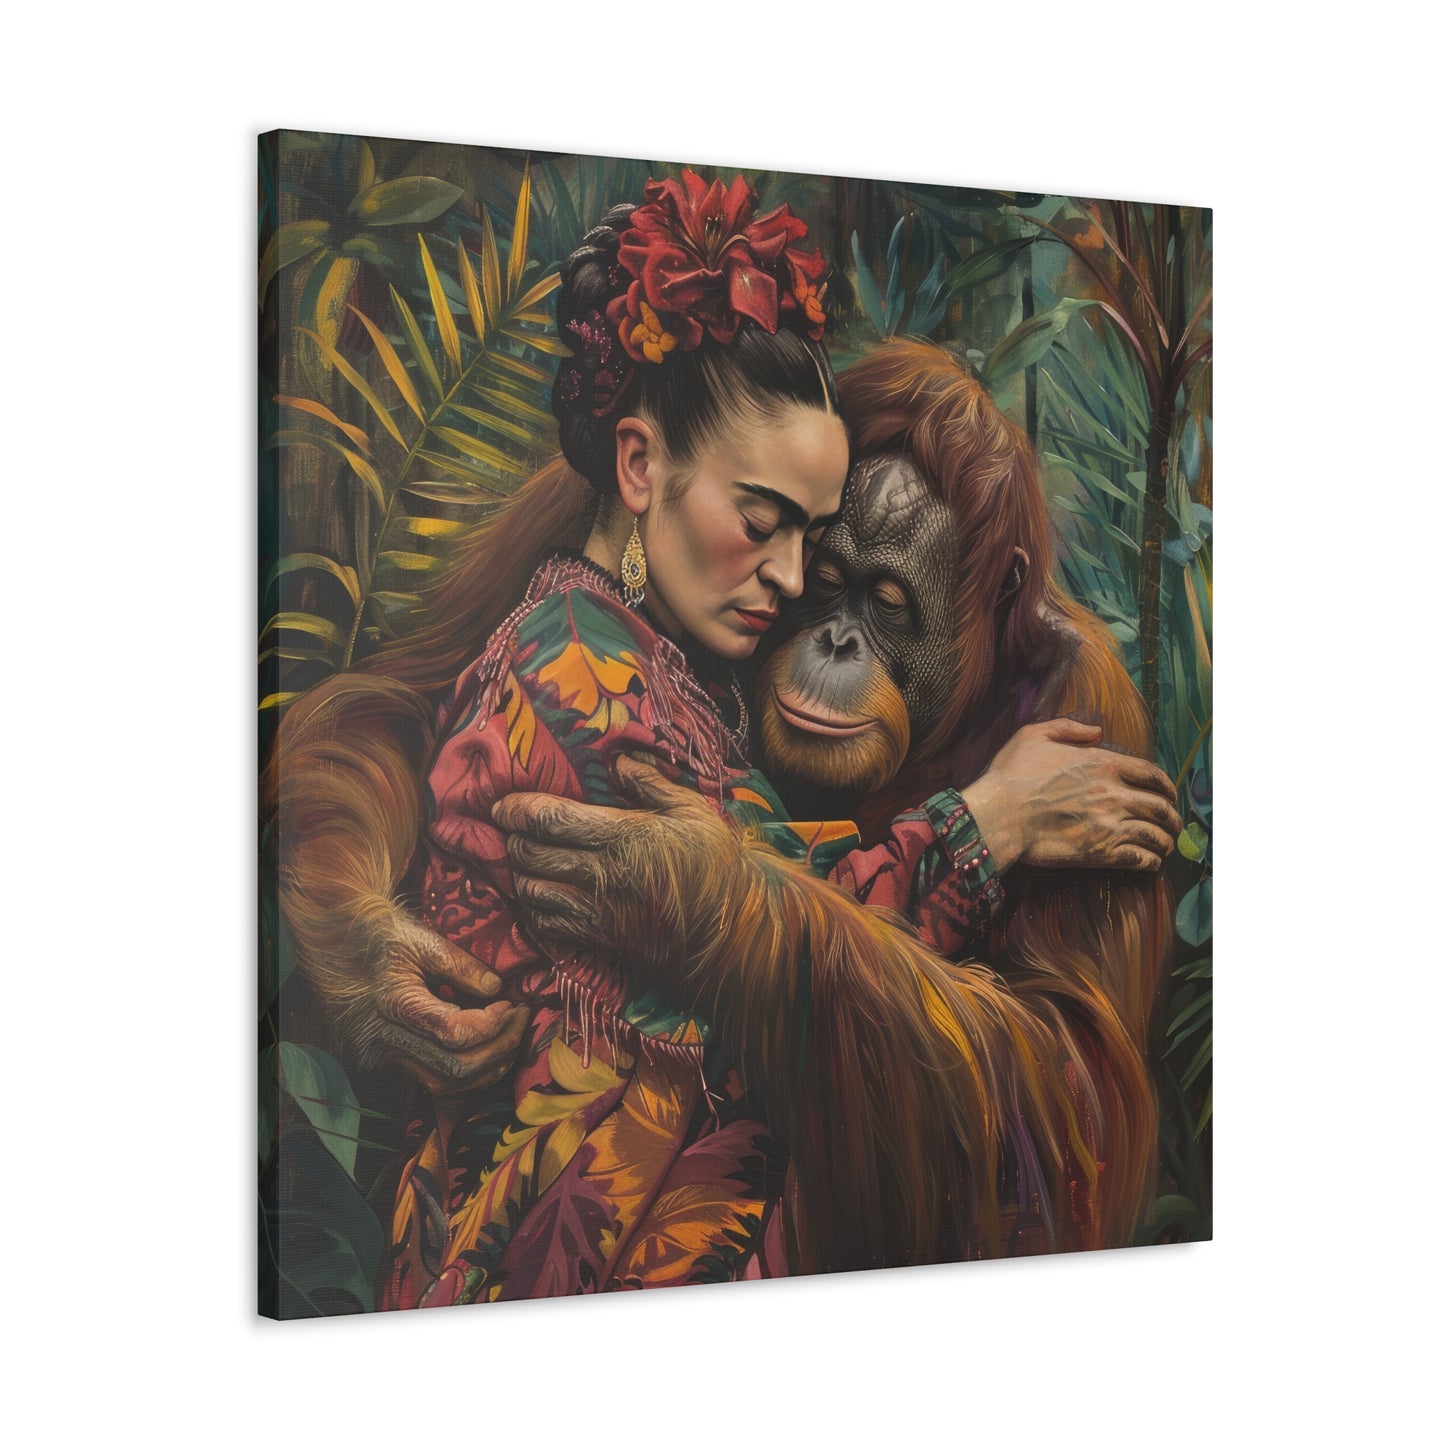 A David Miller inspired artwork of a woman embracing an orangutan amidst tropical foliage. Printify's Embrace of the Wild Exclusive Canvas Print.